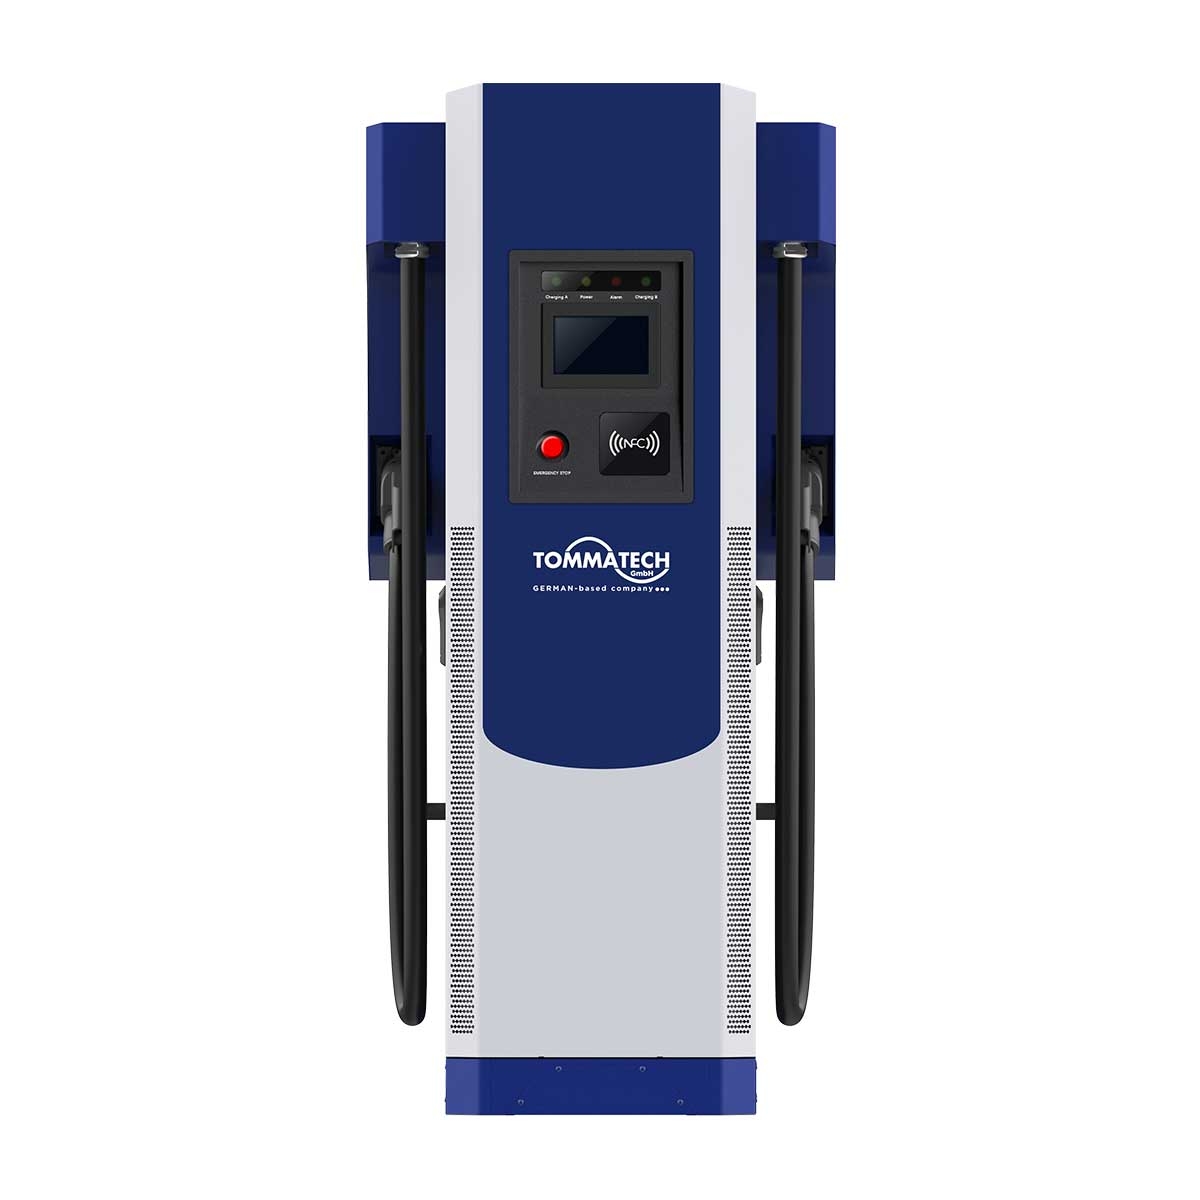 TommaTech Commercial 60kW DC Electric Vehicle Charging Station